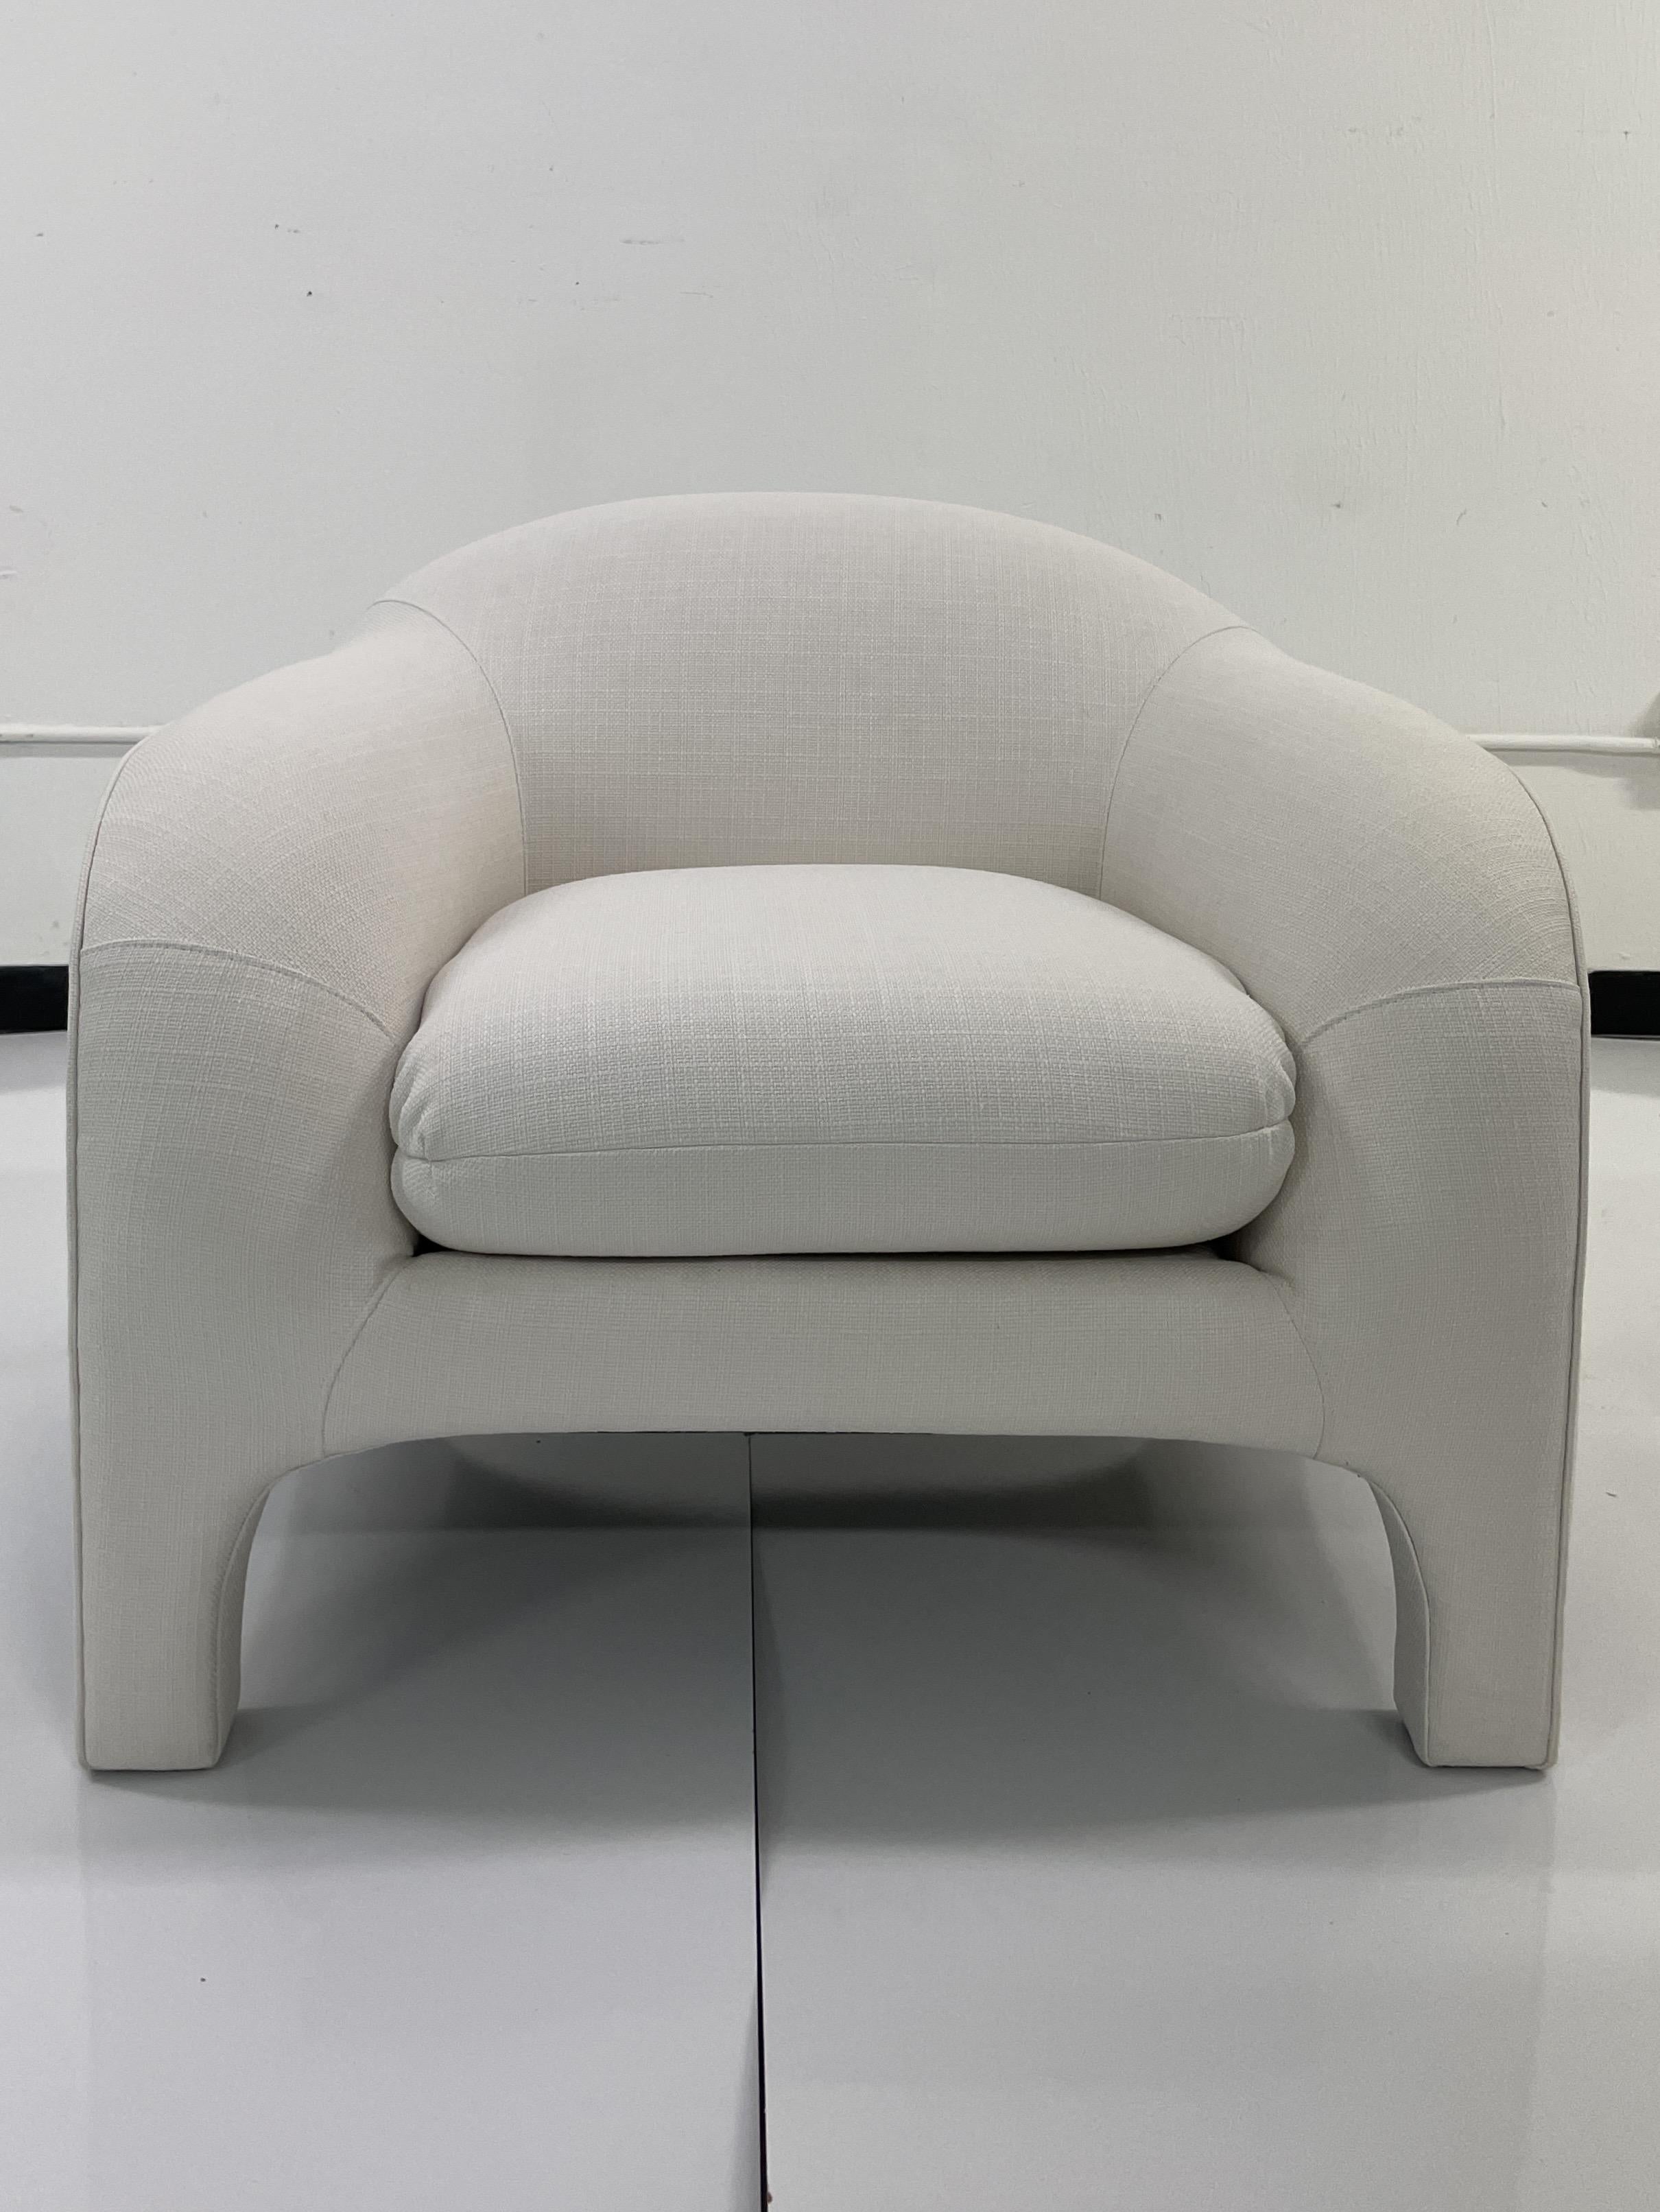 Classic modern details with fabulous curved shapes designed by Todd Hase. Add some modern elements to your living space. This classic sofa will work well with many styles of interiors and is upholstered in Todd Hase textiles high performance off